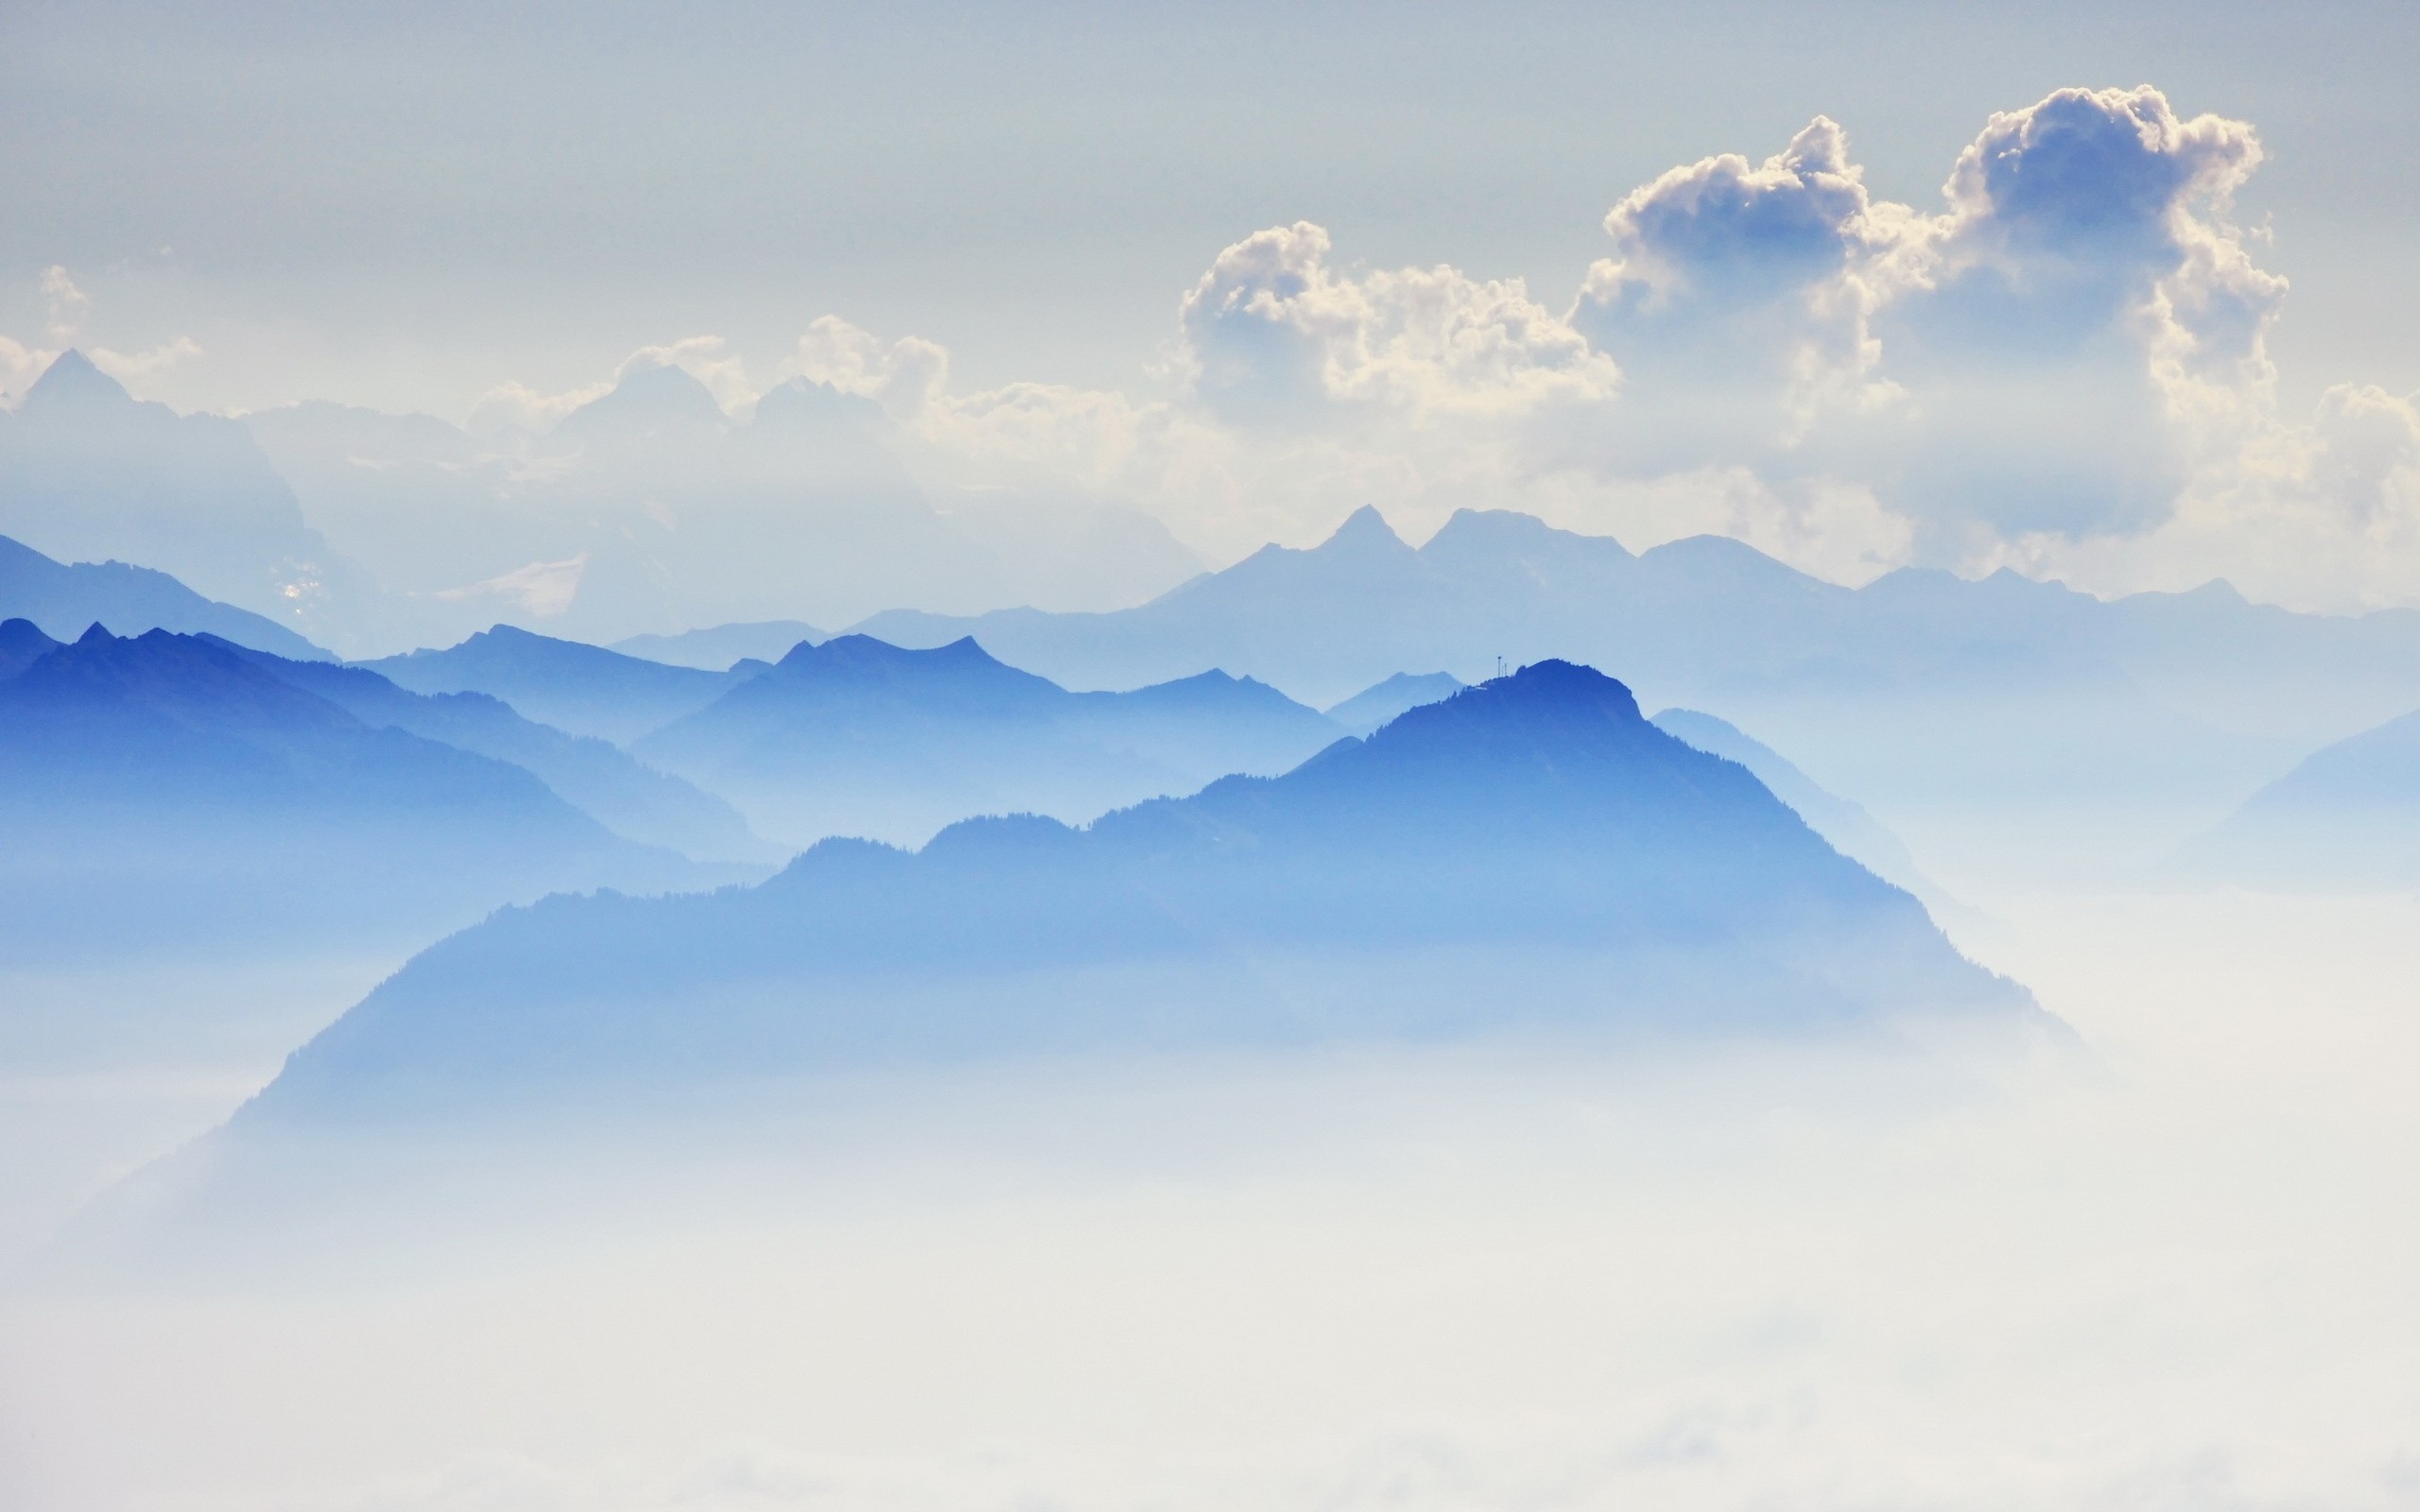 General 2560x1600 clouds nature landscape mountains mist silhouette outdoors